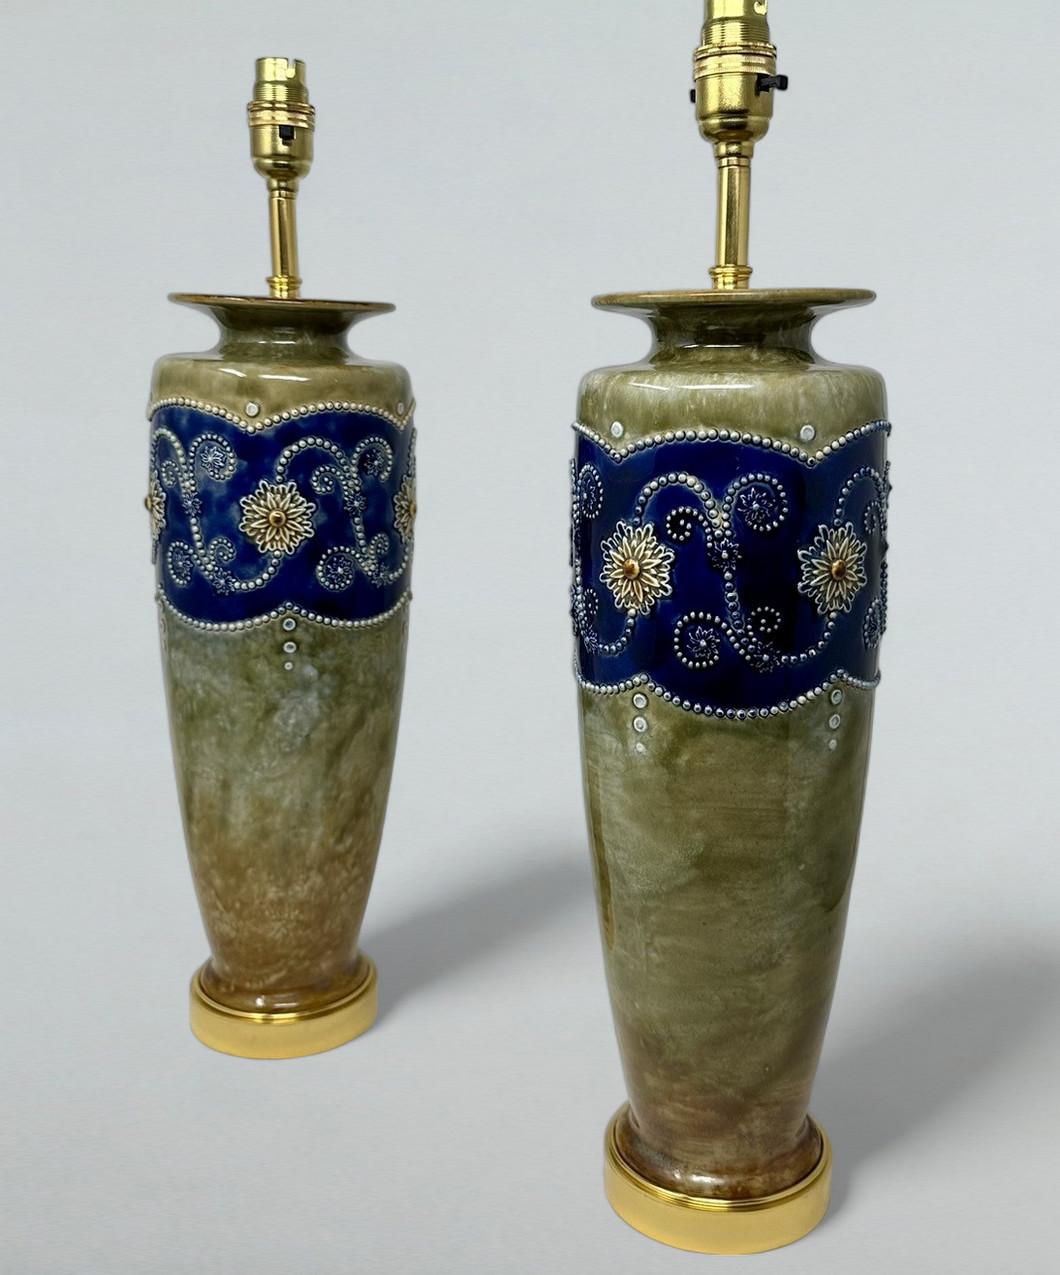 A Very Stylish Identical Pair of English Ormolu Mounted Royal Doulton Lambeth Moulded Salt-Glaze Stoneware Pottery tall slender mantle Vases by Ceramic Artist Minnie Webb, now converted to a pair of electric Table Lamps. Circa 1920s. 

Each of